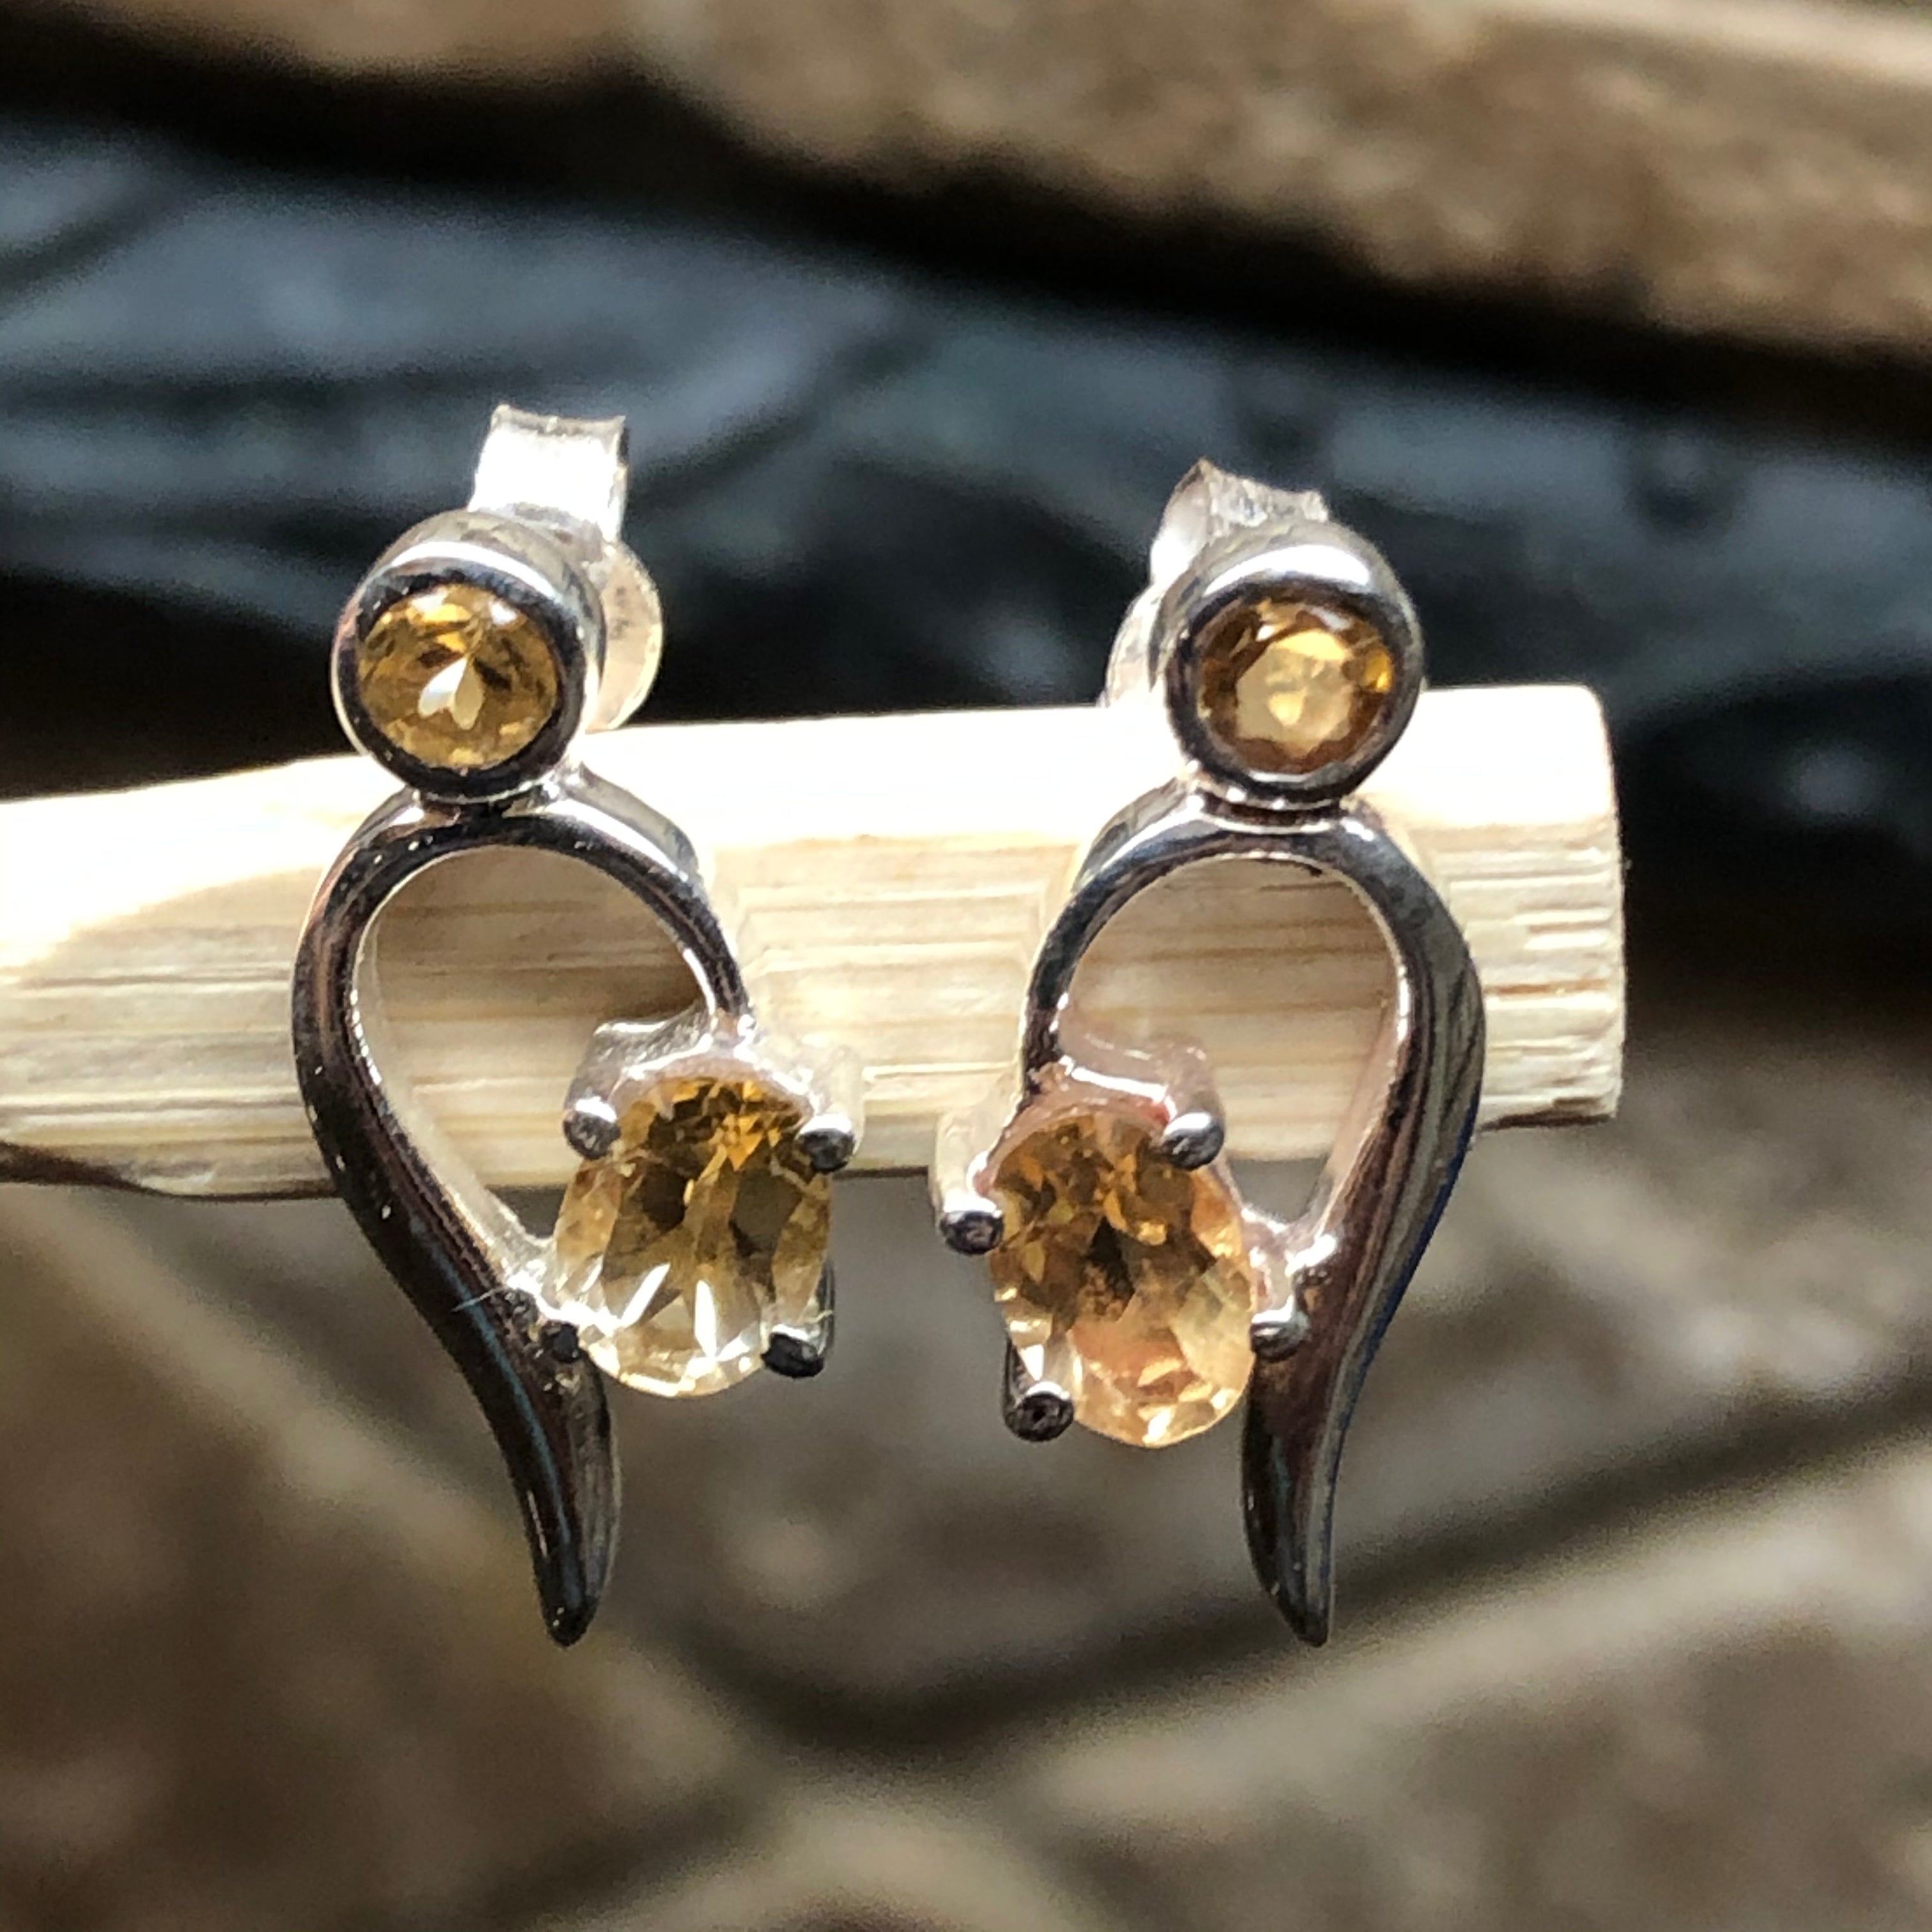 Natural Golden Citrine 925 Solid Sterling Silver Earrings 15mm - Natural Rocks by Kala